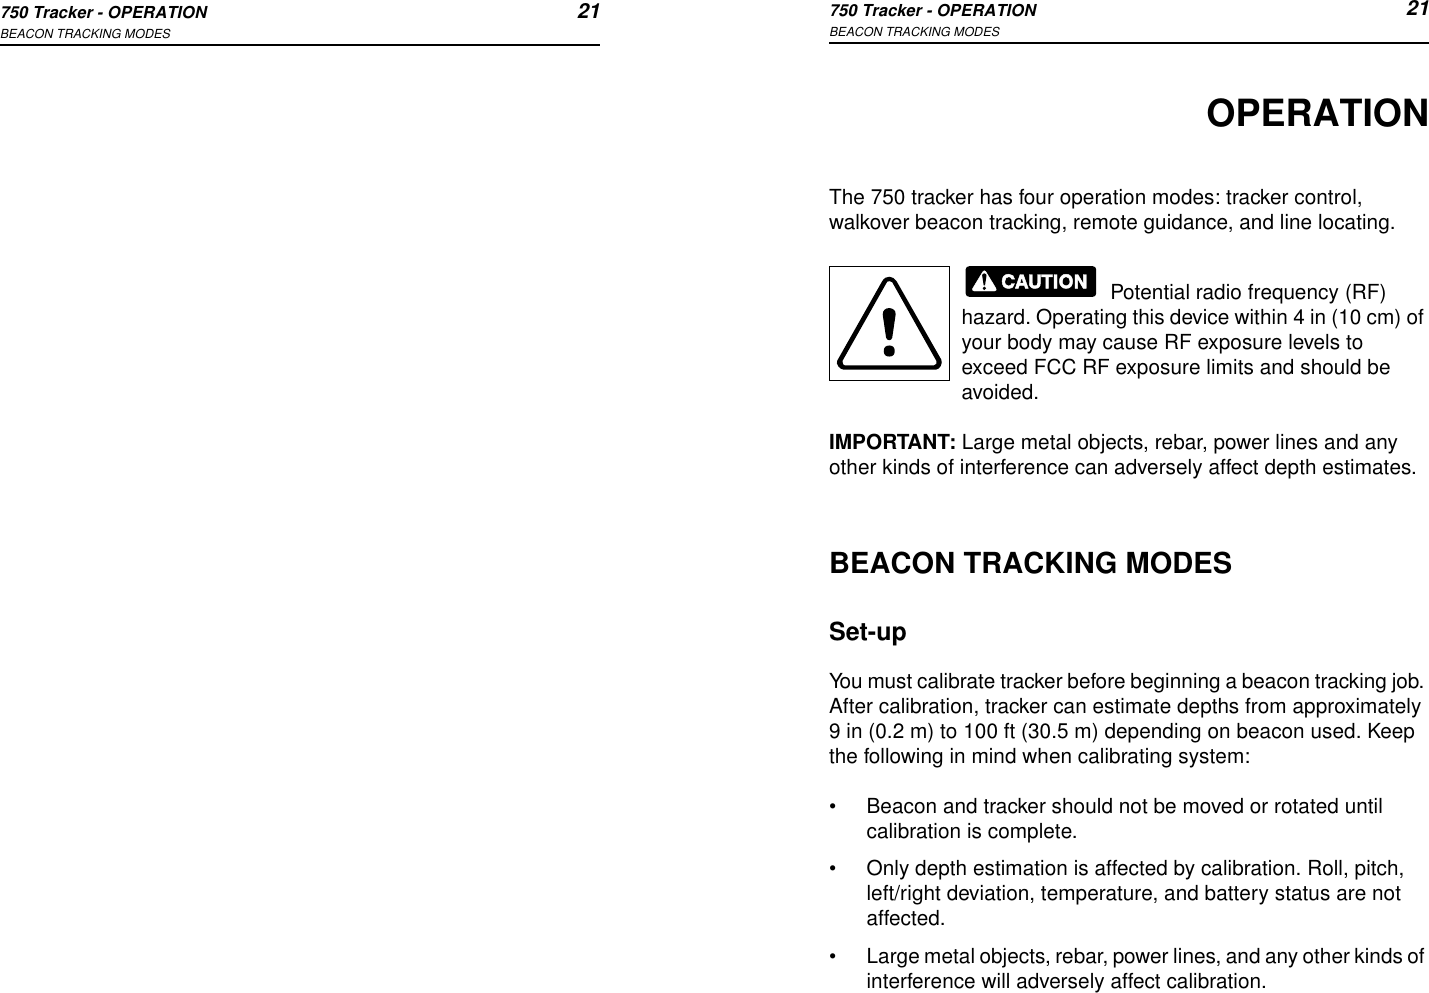 750 Tracker - OPERATION 21BEACON TRACKING MODES750 Tracker - OPERATION 21BEACON TRACKING MODESOPERATIONThe 750 tracker has four operation modes: tracker control, walkover beacon tracking, remote guidance, and line locating. Potential radio frequency (RF) hazard. Operating this device within 4 in (10 cm) of your body may cause RF exposure levels to exceed FCC RF exposure limits and should be avoided.IMPORTANT: Large metal objects, rebar, power lines and any other kinds of interference can adversely affect depth estimates.BEACON TRACKING MODESSet-upYou must calibrate tracker before beginning a beacon tracking job. After calibration, tracker can estimate depths from approximately 9 in (0.2 m) to 100 ft (30.5 m) depending on beacon used. Keep the following in mind when calibrating system:•Beacon and tracker should not be moved or rotated until calibration is complete.•Only depth estimation is affected by calibration. Roll, pitch, left/right deviation, temperature, and battery status are not affected.•Large metal objects, rebar, power lines, and any other kinds of interference will adversely affect calibration.